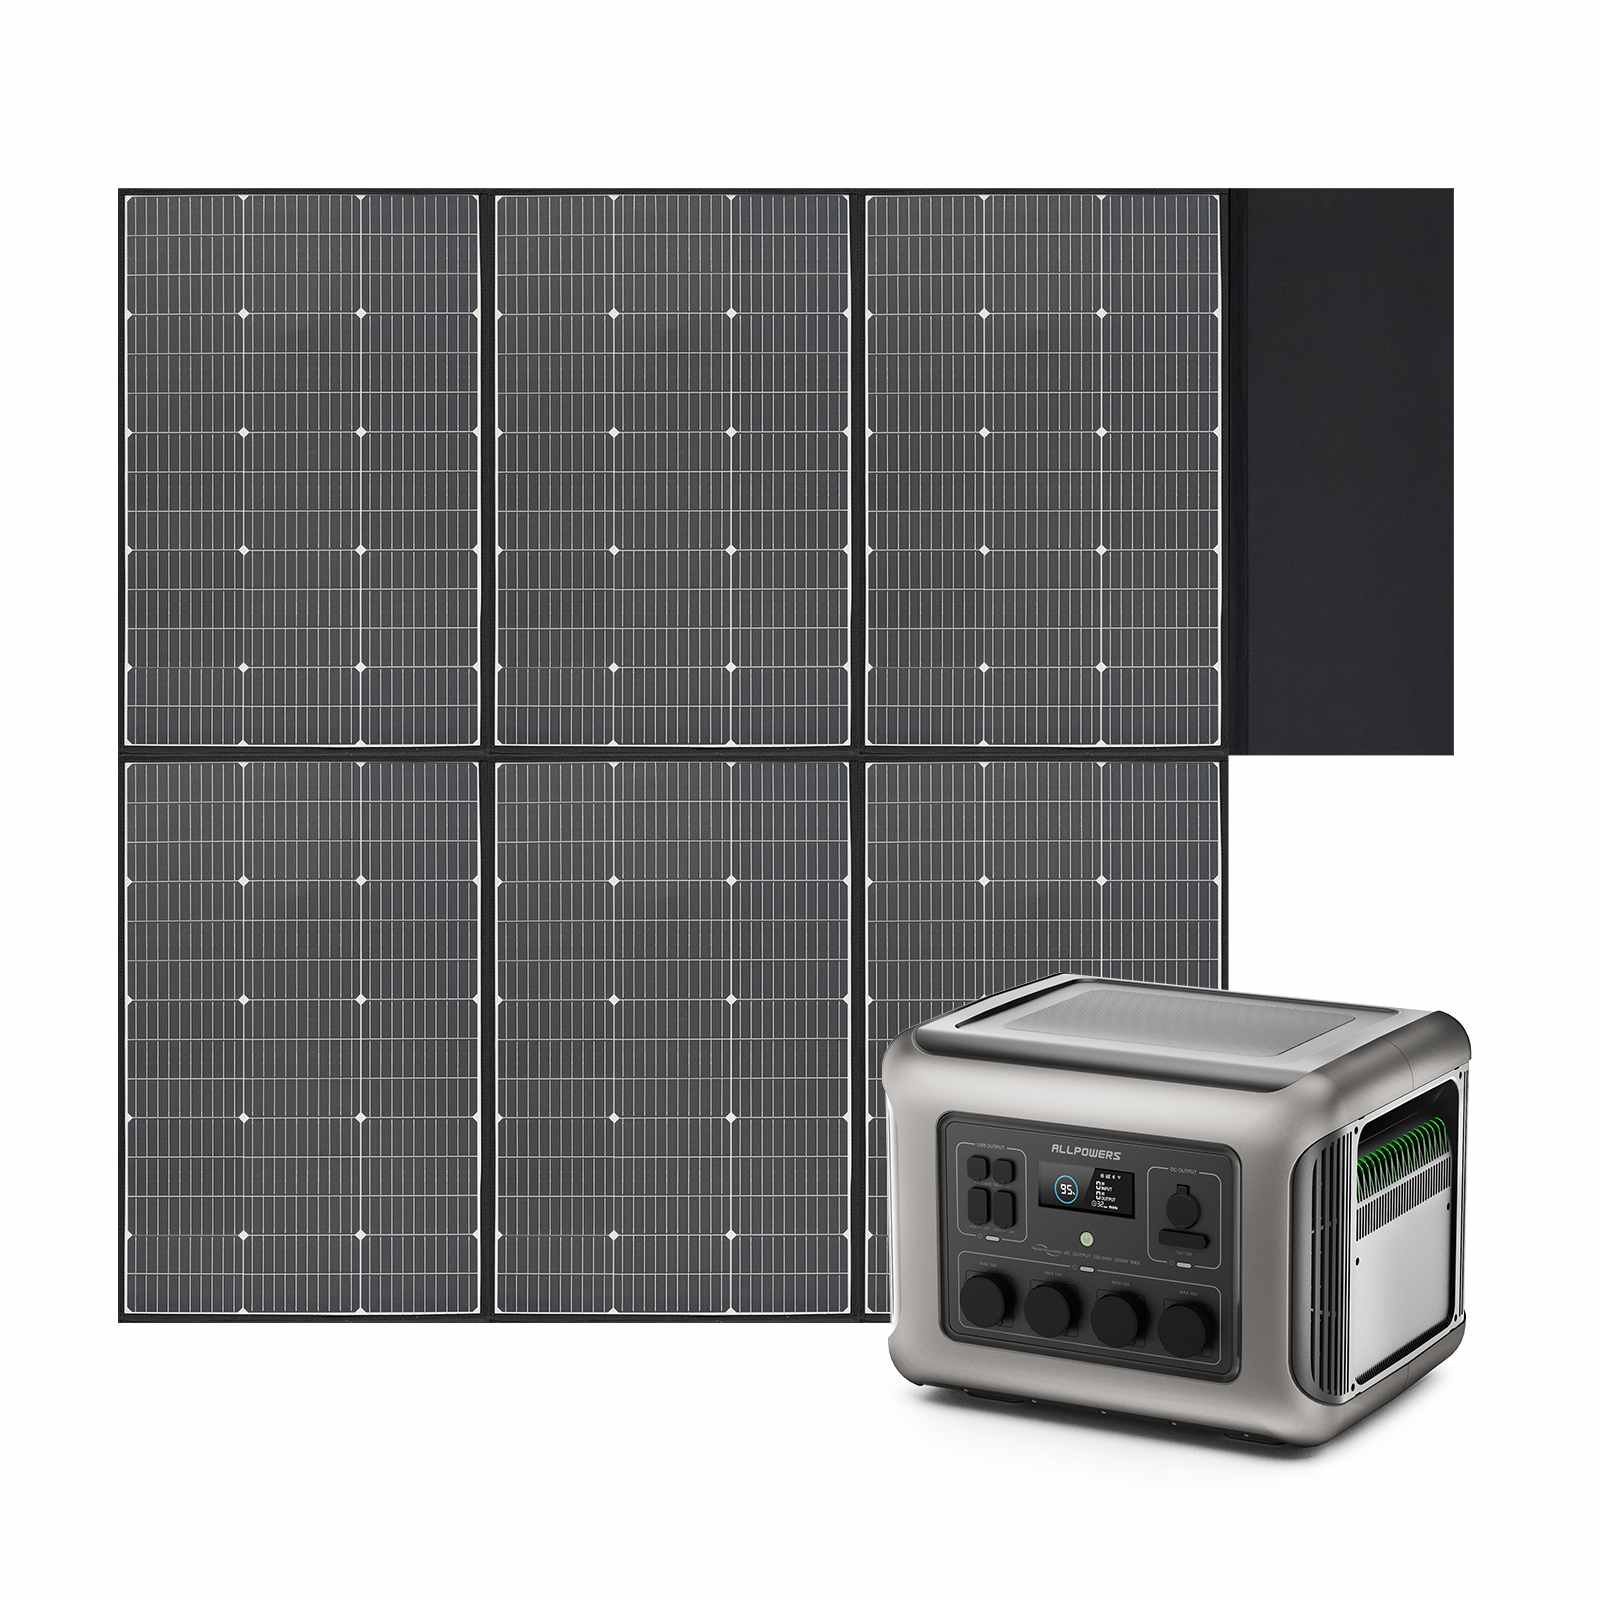 ALLPOWERS R2500 Solar Generator Portable Home Backup Power Station 2500W 2016Wh with SP039 600W Solar Panel